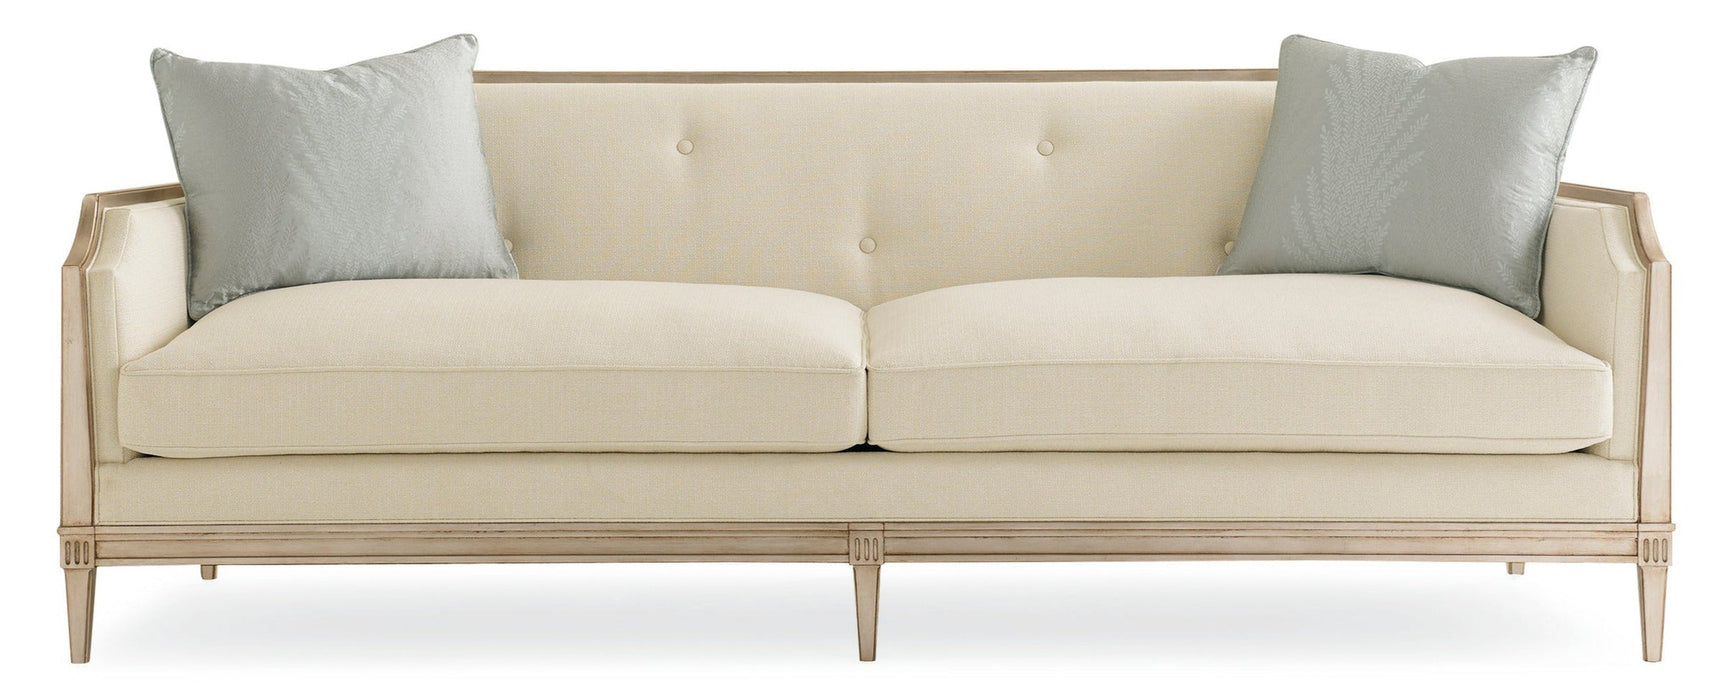 Caracole Upholstery Frame Of Reference Loveseat Open Box Item